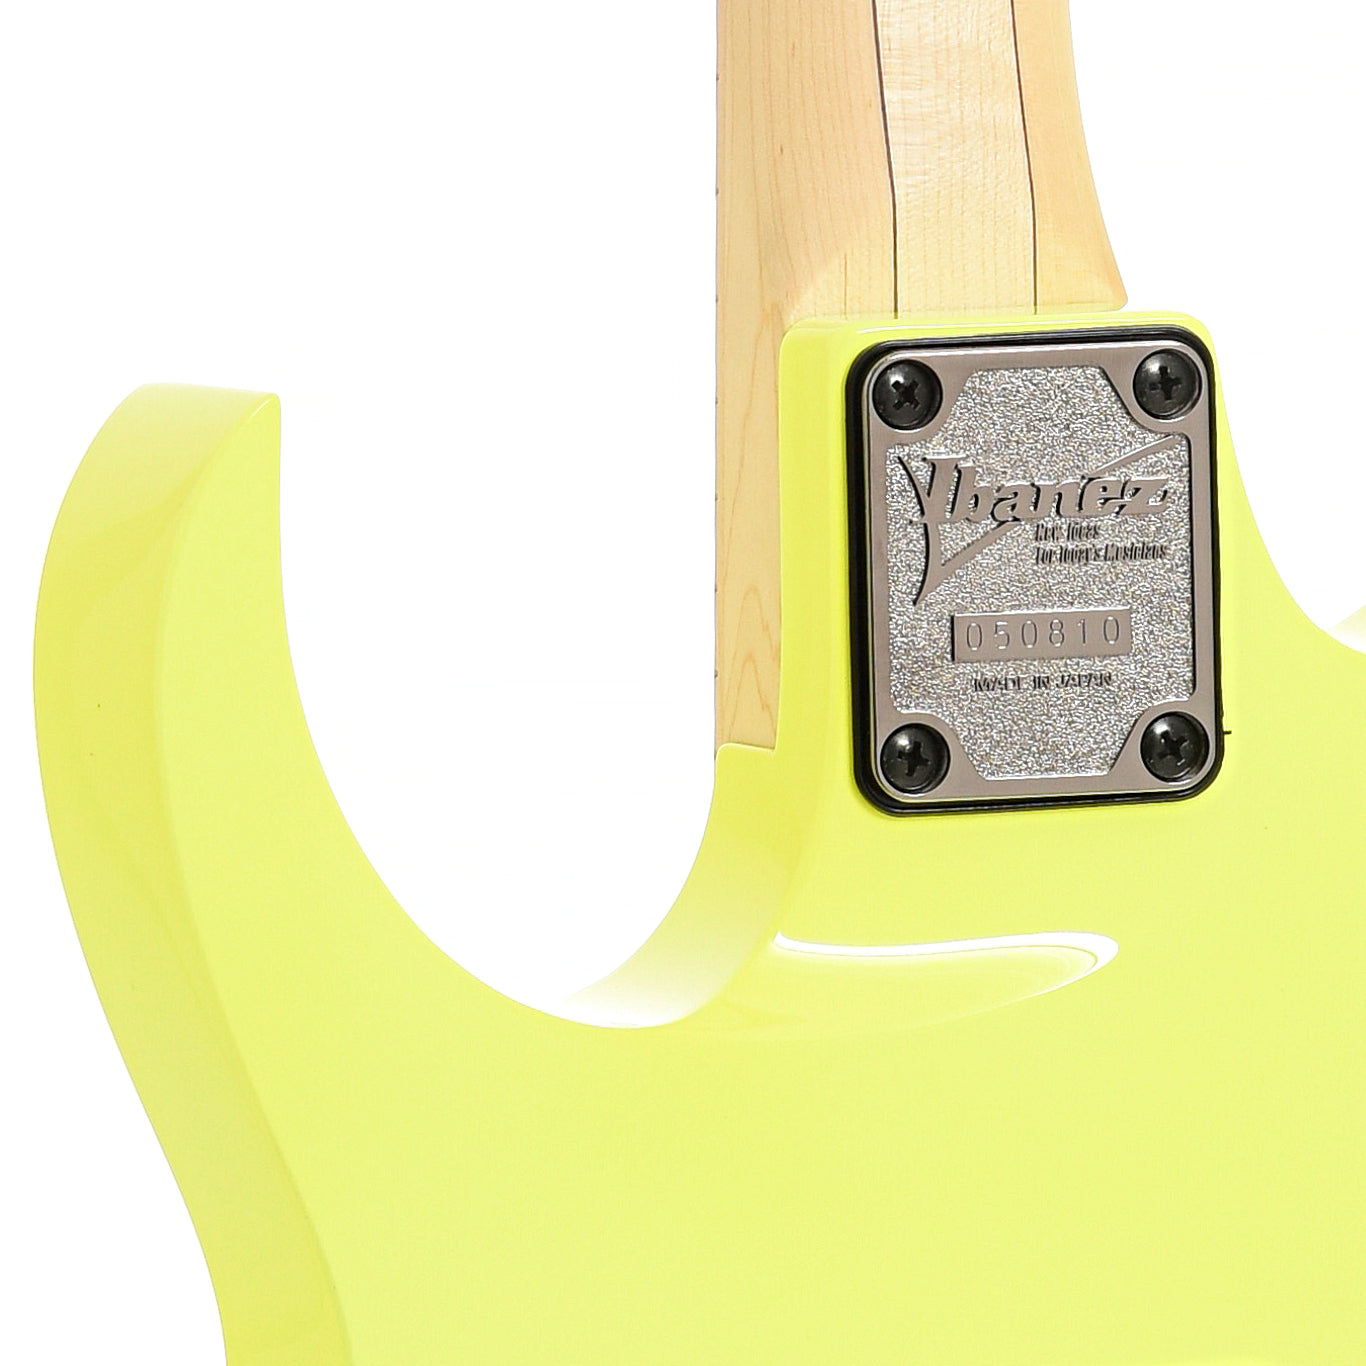 Neck joint of Ibanez RG550 Genesis Collection Electric Guitar, Desert Sun Yellow